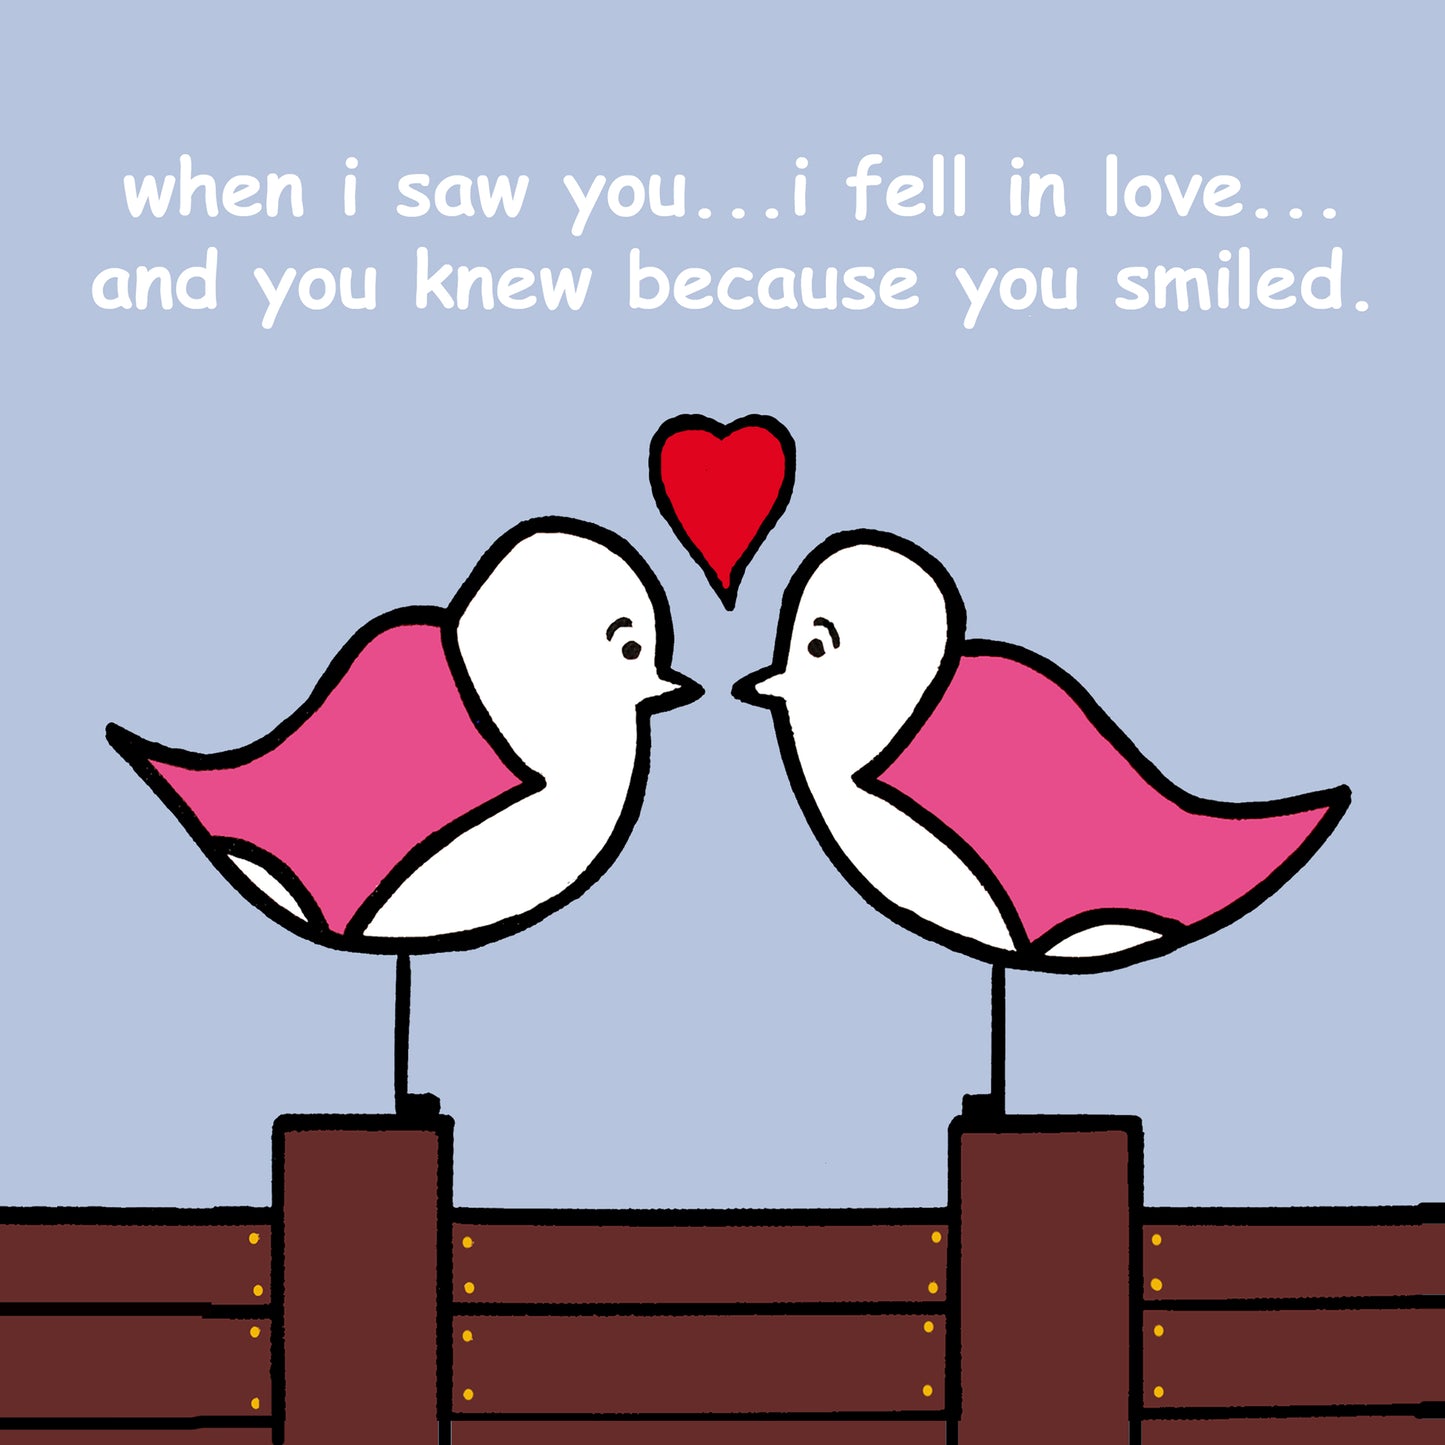 Two pink winged seagulls are facing each other stood on a groyne, above both their heads is a red love heart. The sky is pale blue with white text that says when i saw you...i fell in love...and you knew because you smiled.